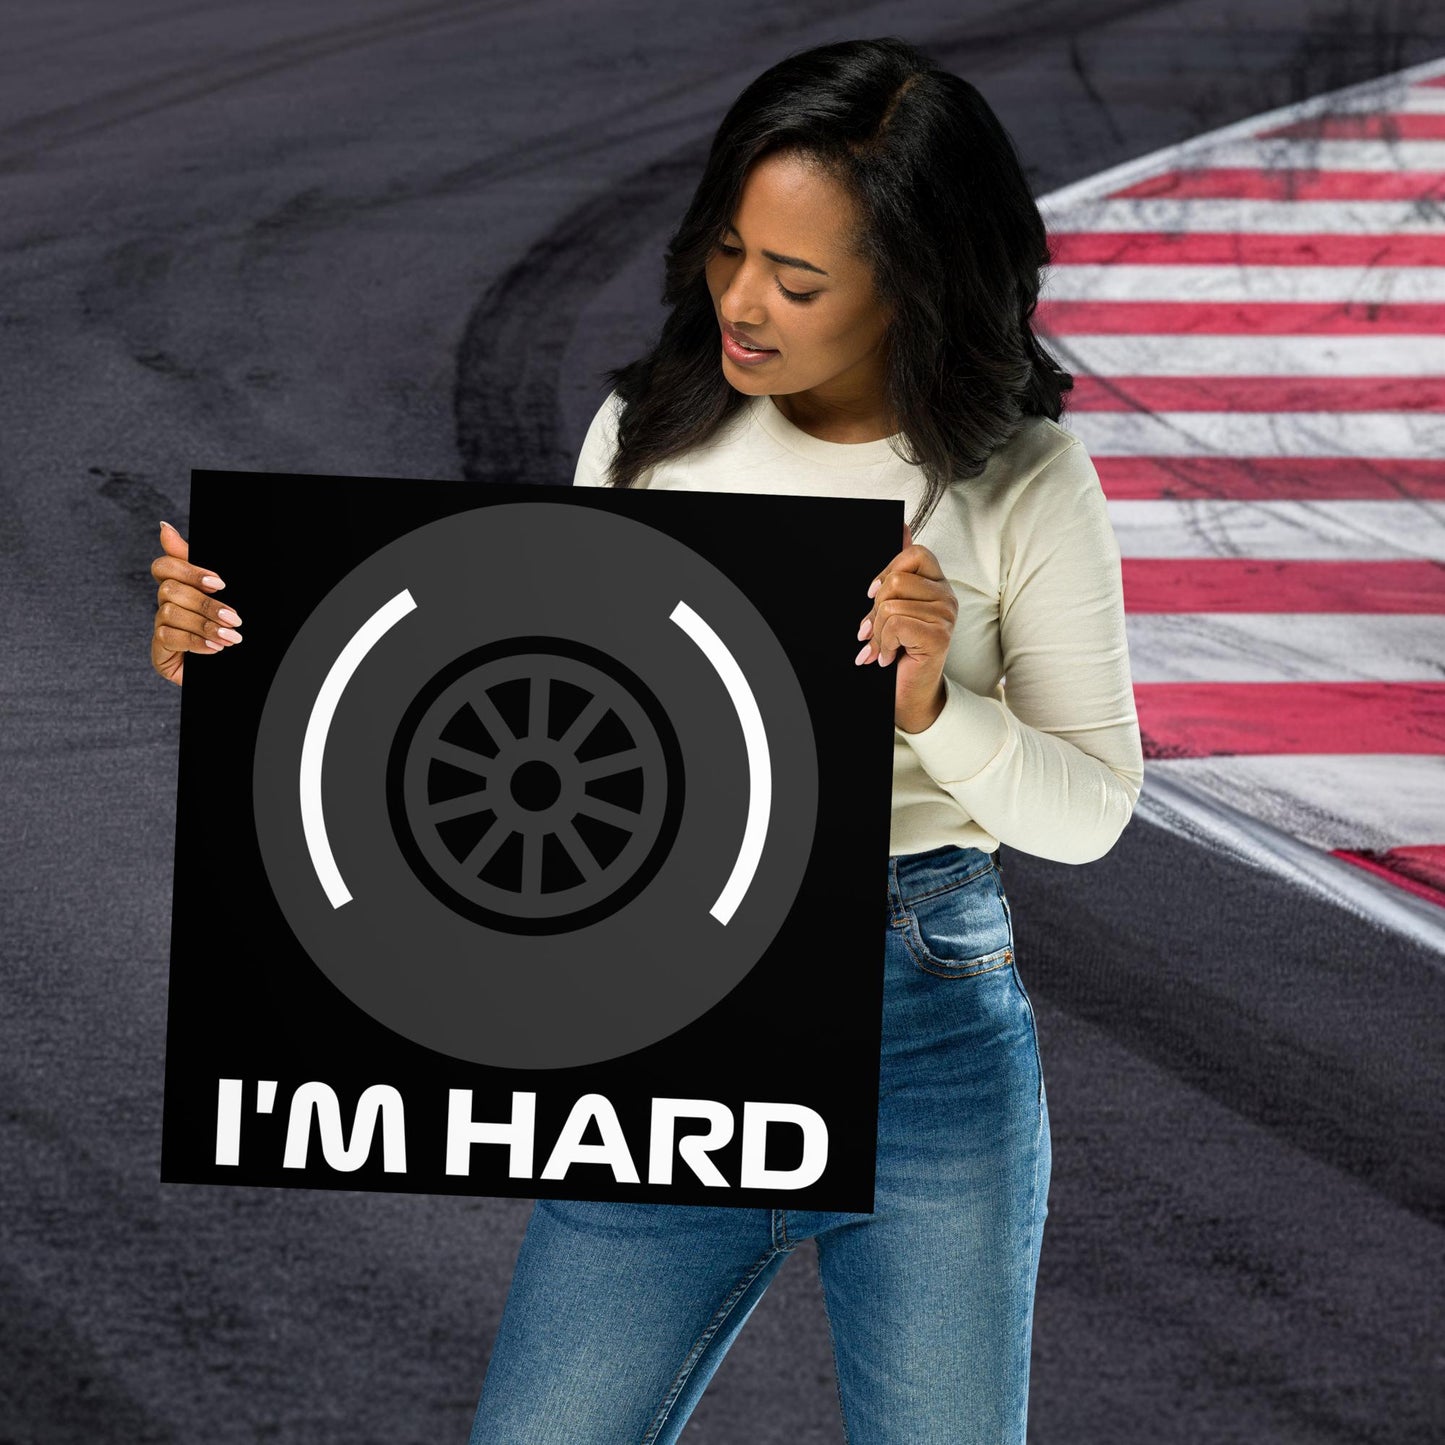 I'm Hard Tyres Funny F1 Poster Next Cult Brand